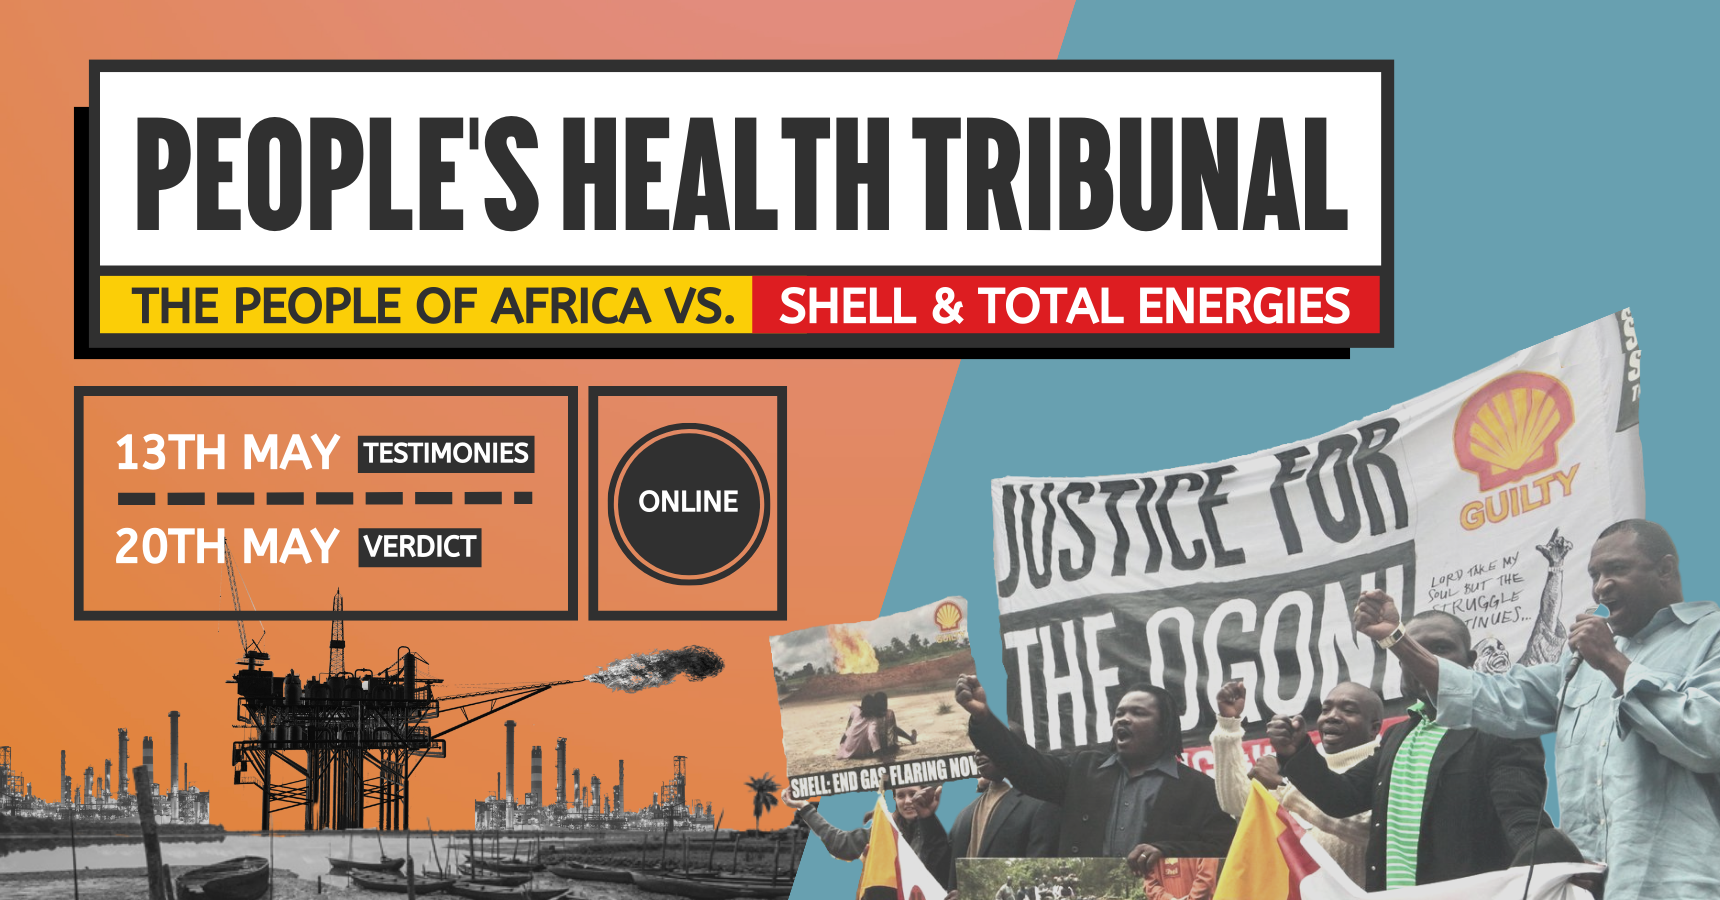 Peoples' Health Tribunal: Shell & Total Energies vs The People of Africa. 13th May: Testimonies. 20th May: Verdict. Online.